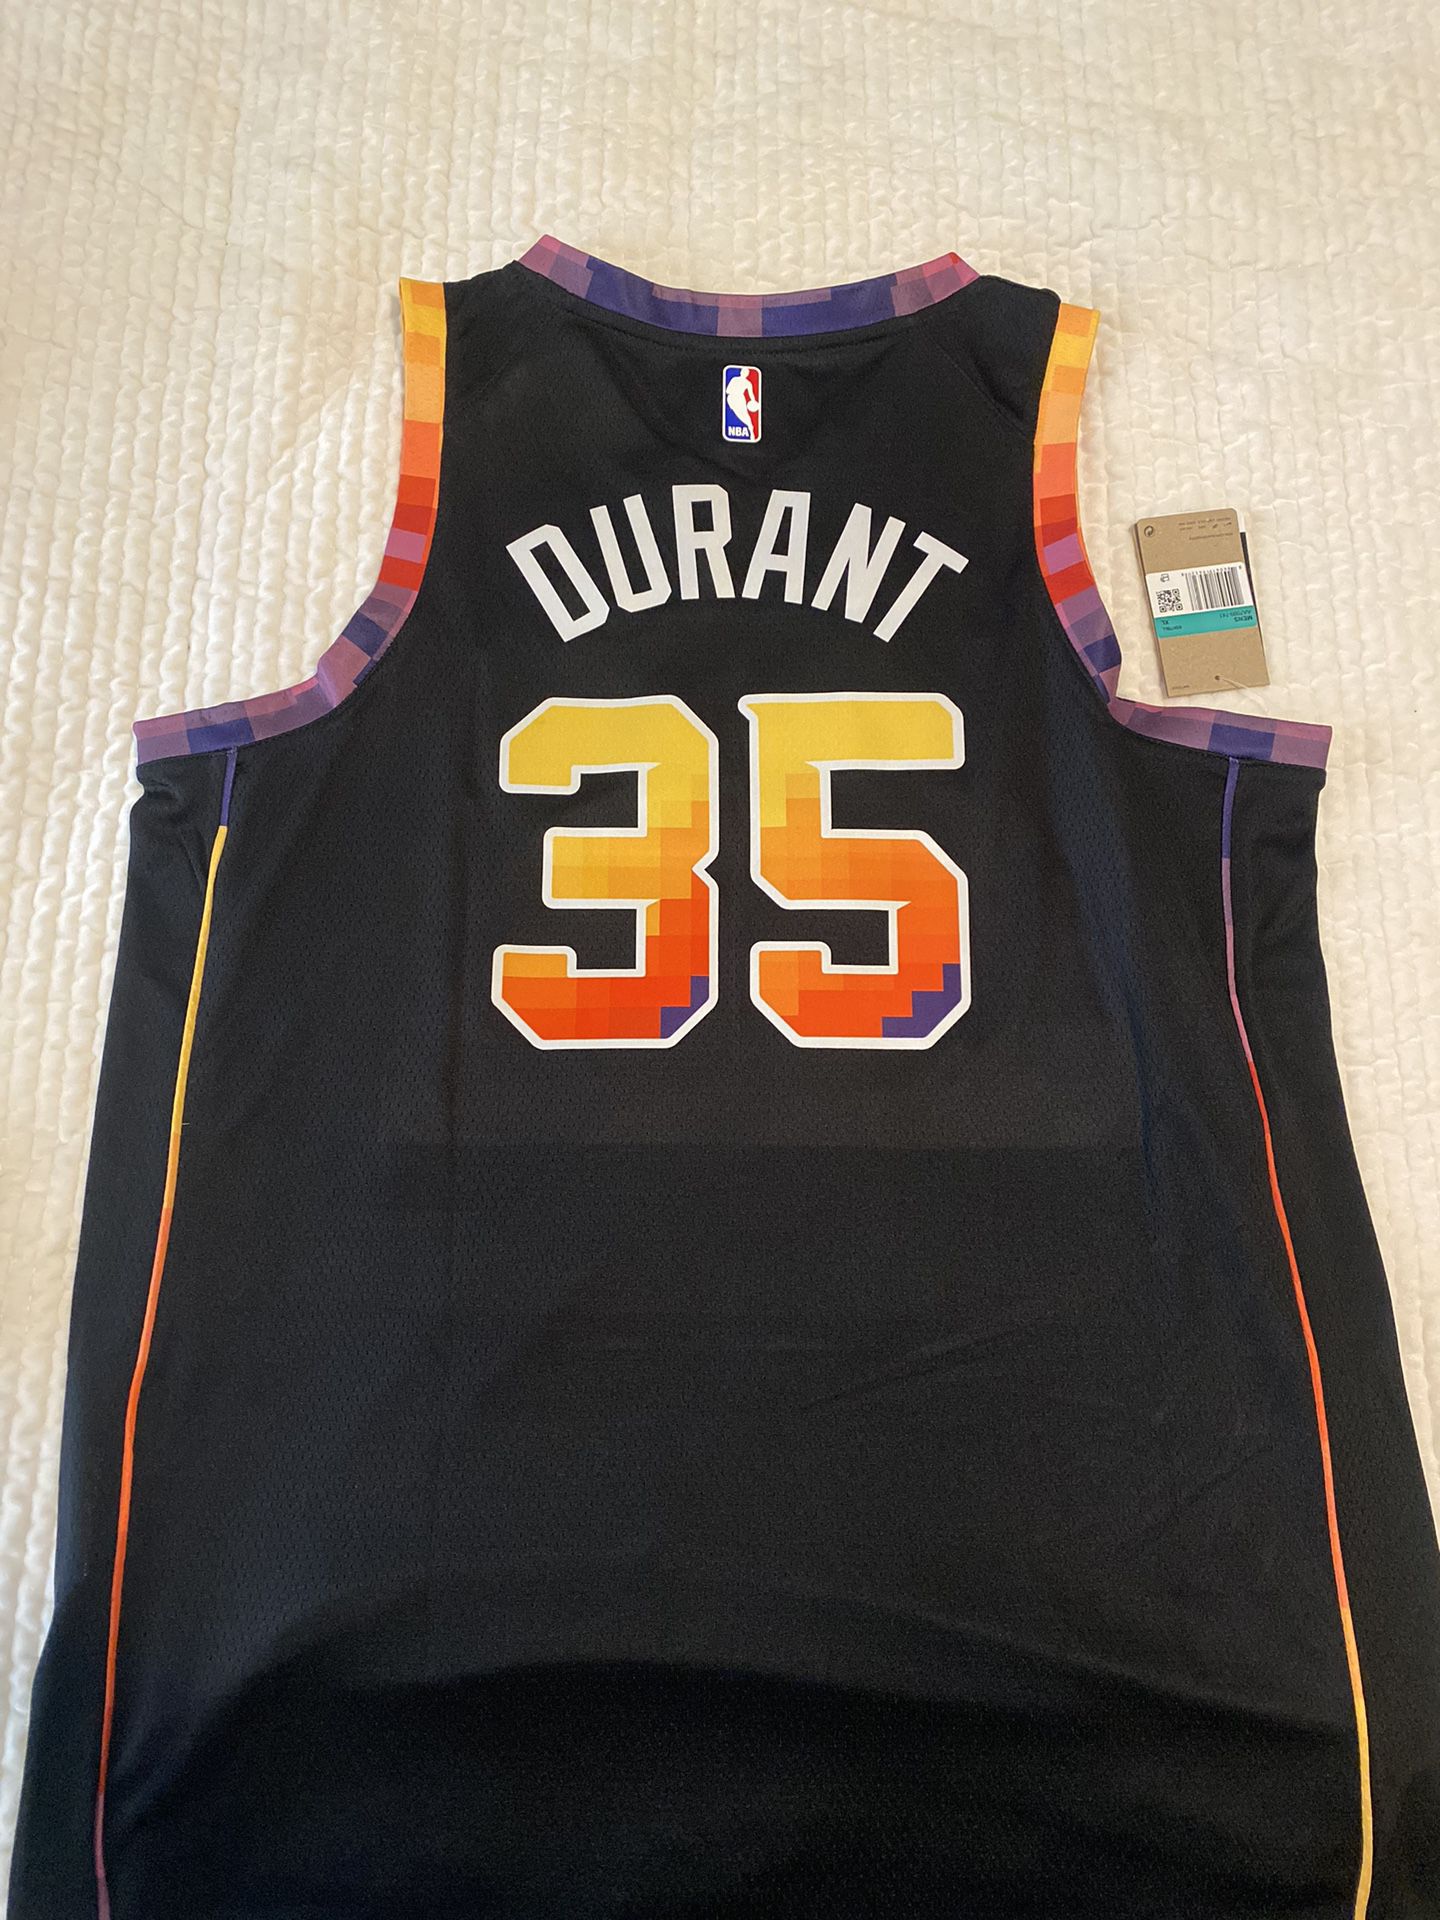 Phoenix Suns Jerseys - clothing & accessories - by owner - apparel